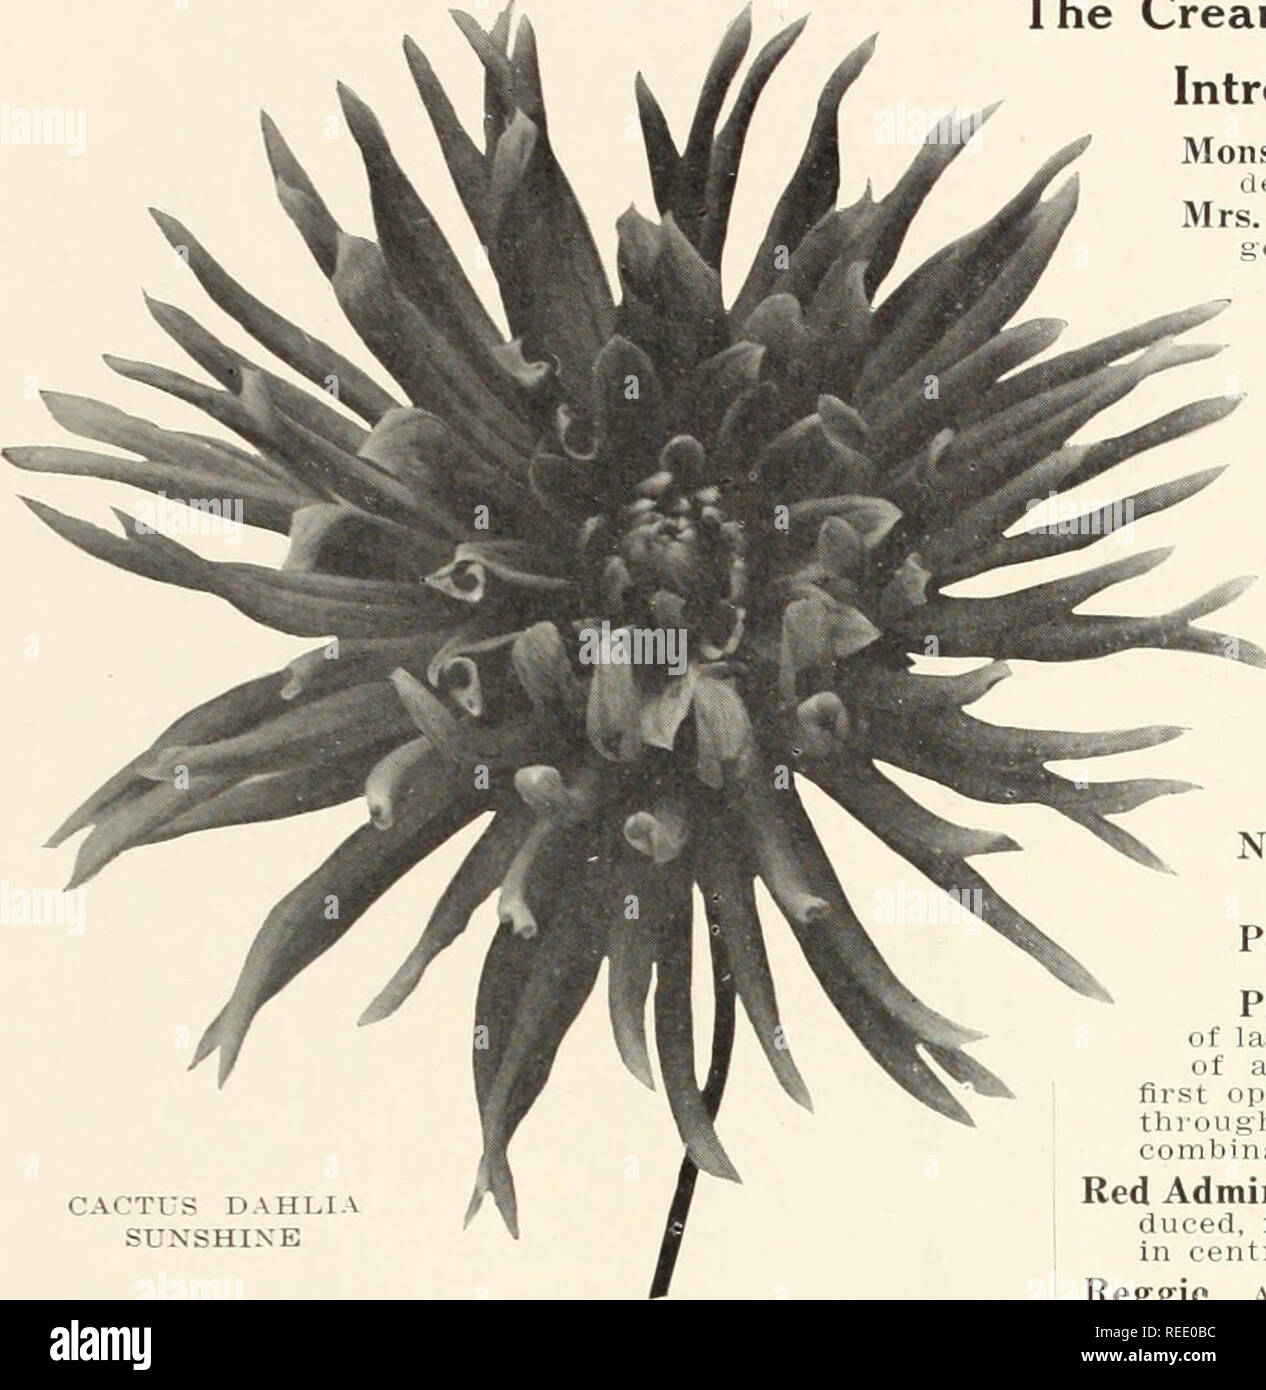 . Complete catalogue of dahlias. Flowers Seeds Catalogs; Nurseries (Horticulture) Catalogs; Dahlias Seeds Catalogs. SPECIAL DAHLIA CATALOGUE 11. ICTUS dahlia SUNSHINE a soft Rivalin. Narrow, long incurved petals, very full, of a delicate tender rose, very free and fine for cutting Rosaeflora. A particular free-flowering variety, with long, straight petals of a pure rose, the centre of the flower being white. Rosea. One of the most distinct and attractive, of a most pleasing rose color; the flowers are of largest size and finest quality. Rosa Siegerin. A beautiful flower of true cactus form, wi Stock Photo